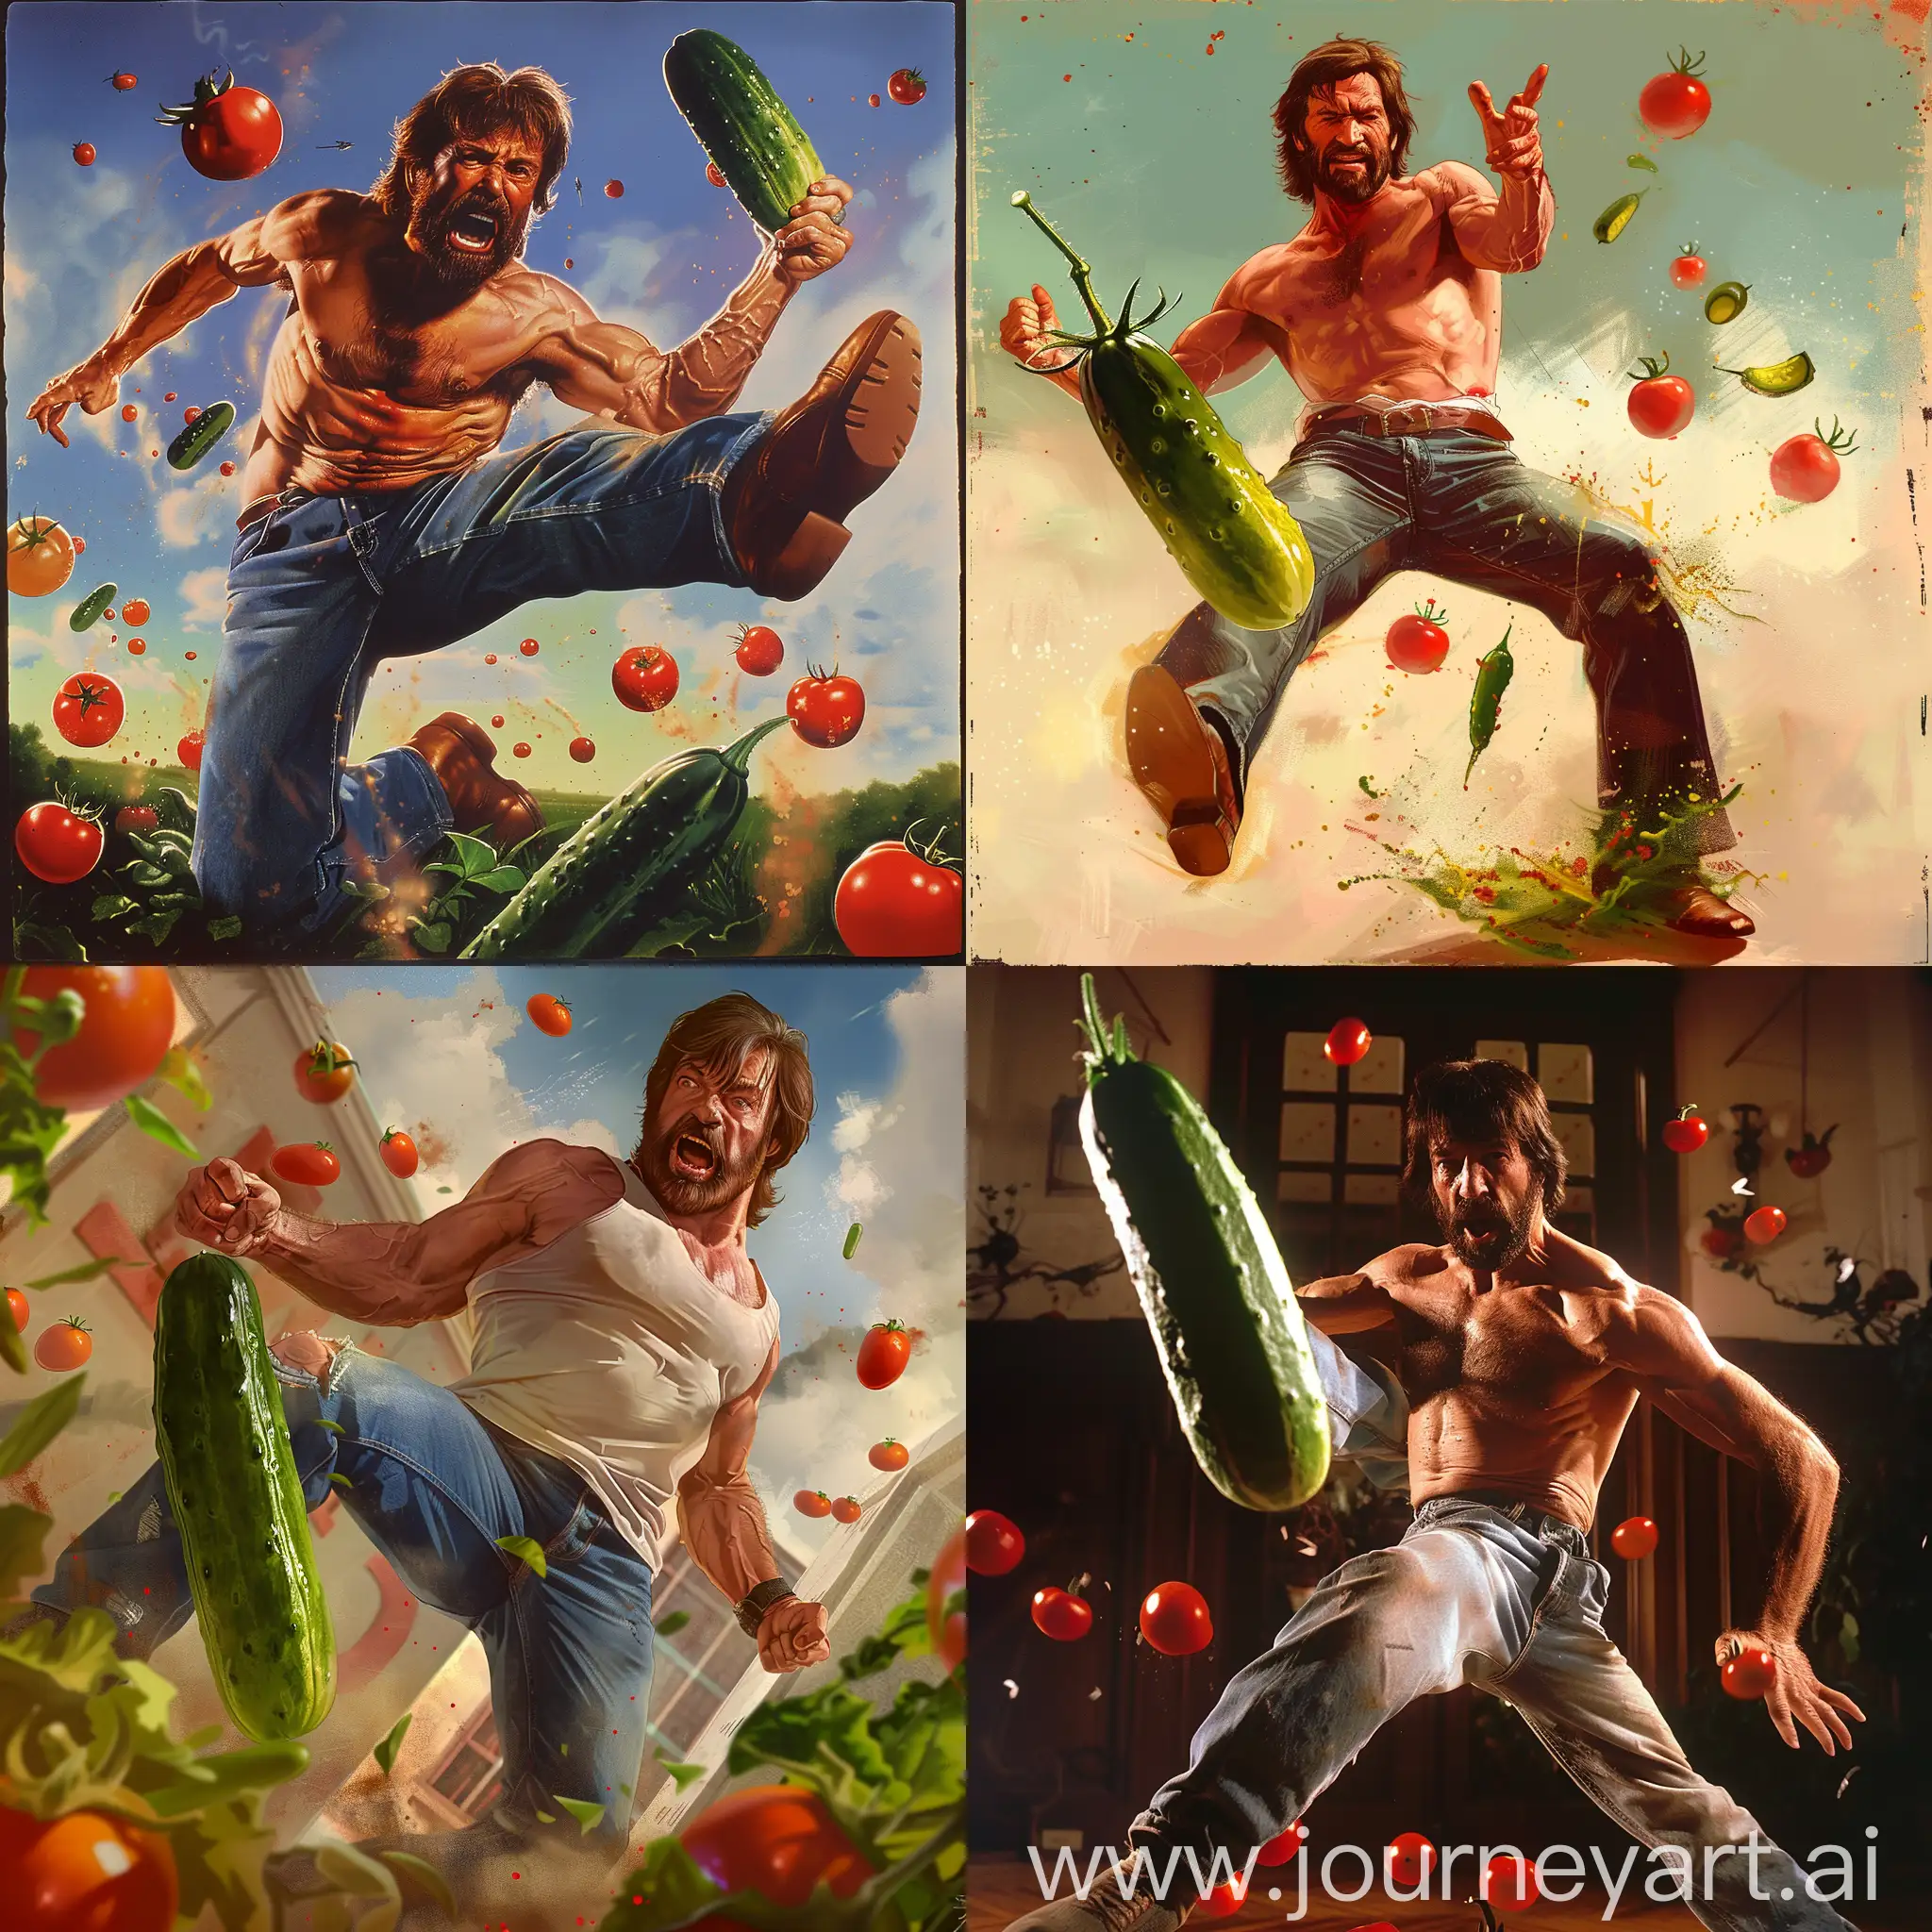 Chuck-Norris-Kicking-Cucumber-with-Flying-Tomatoes